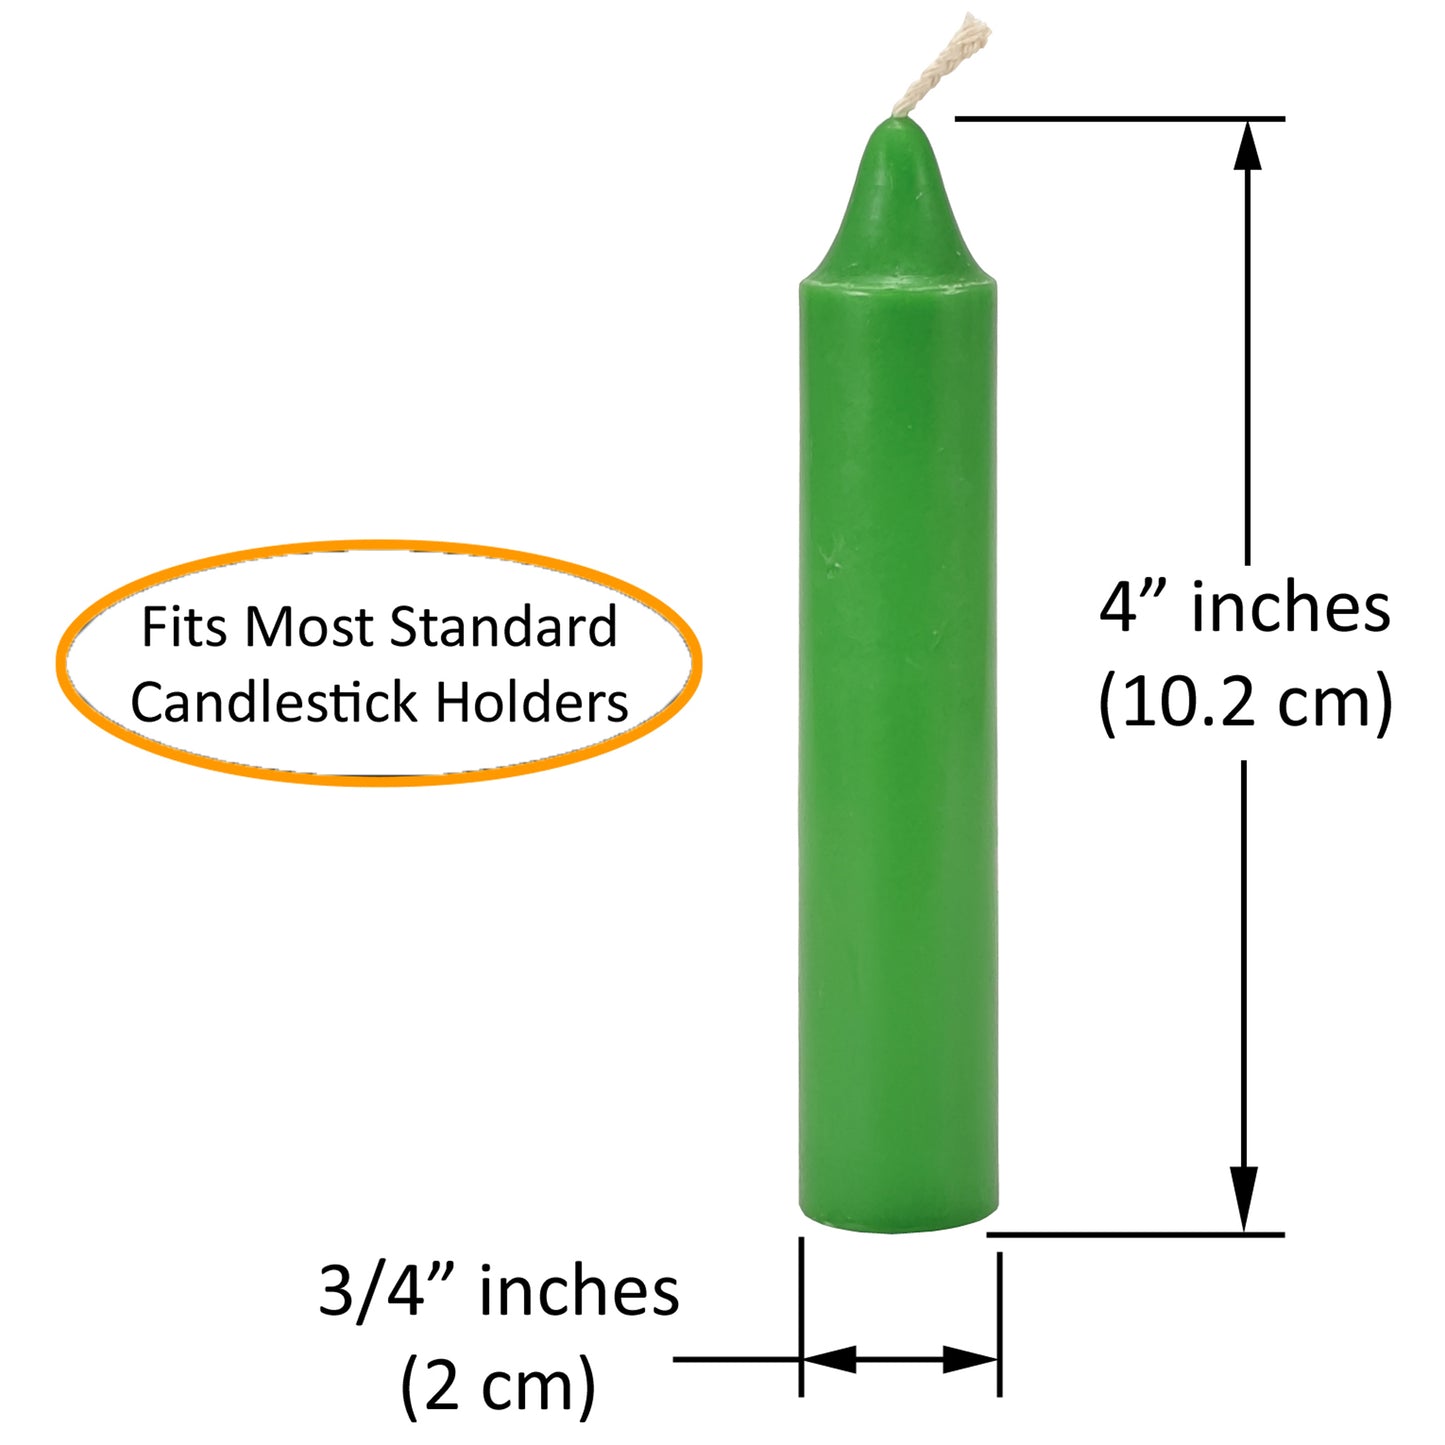 Infographic, candle dimensions, 4 inches tall, .75 inches diameter.